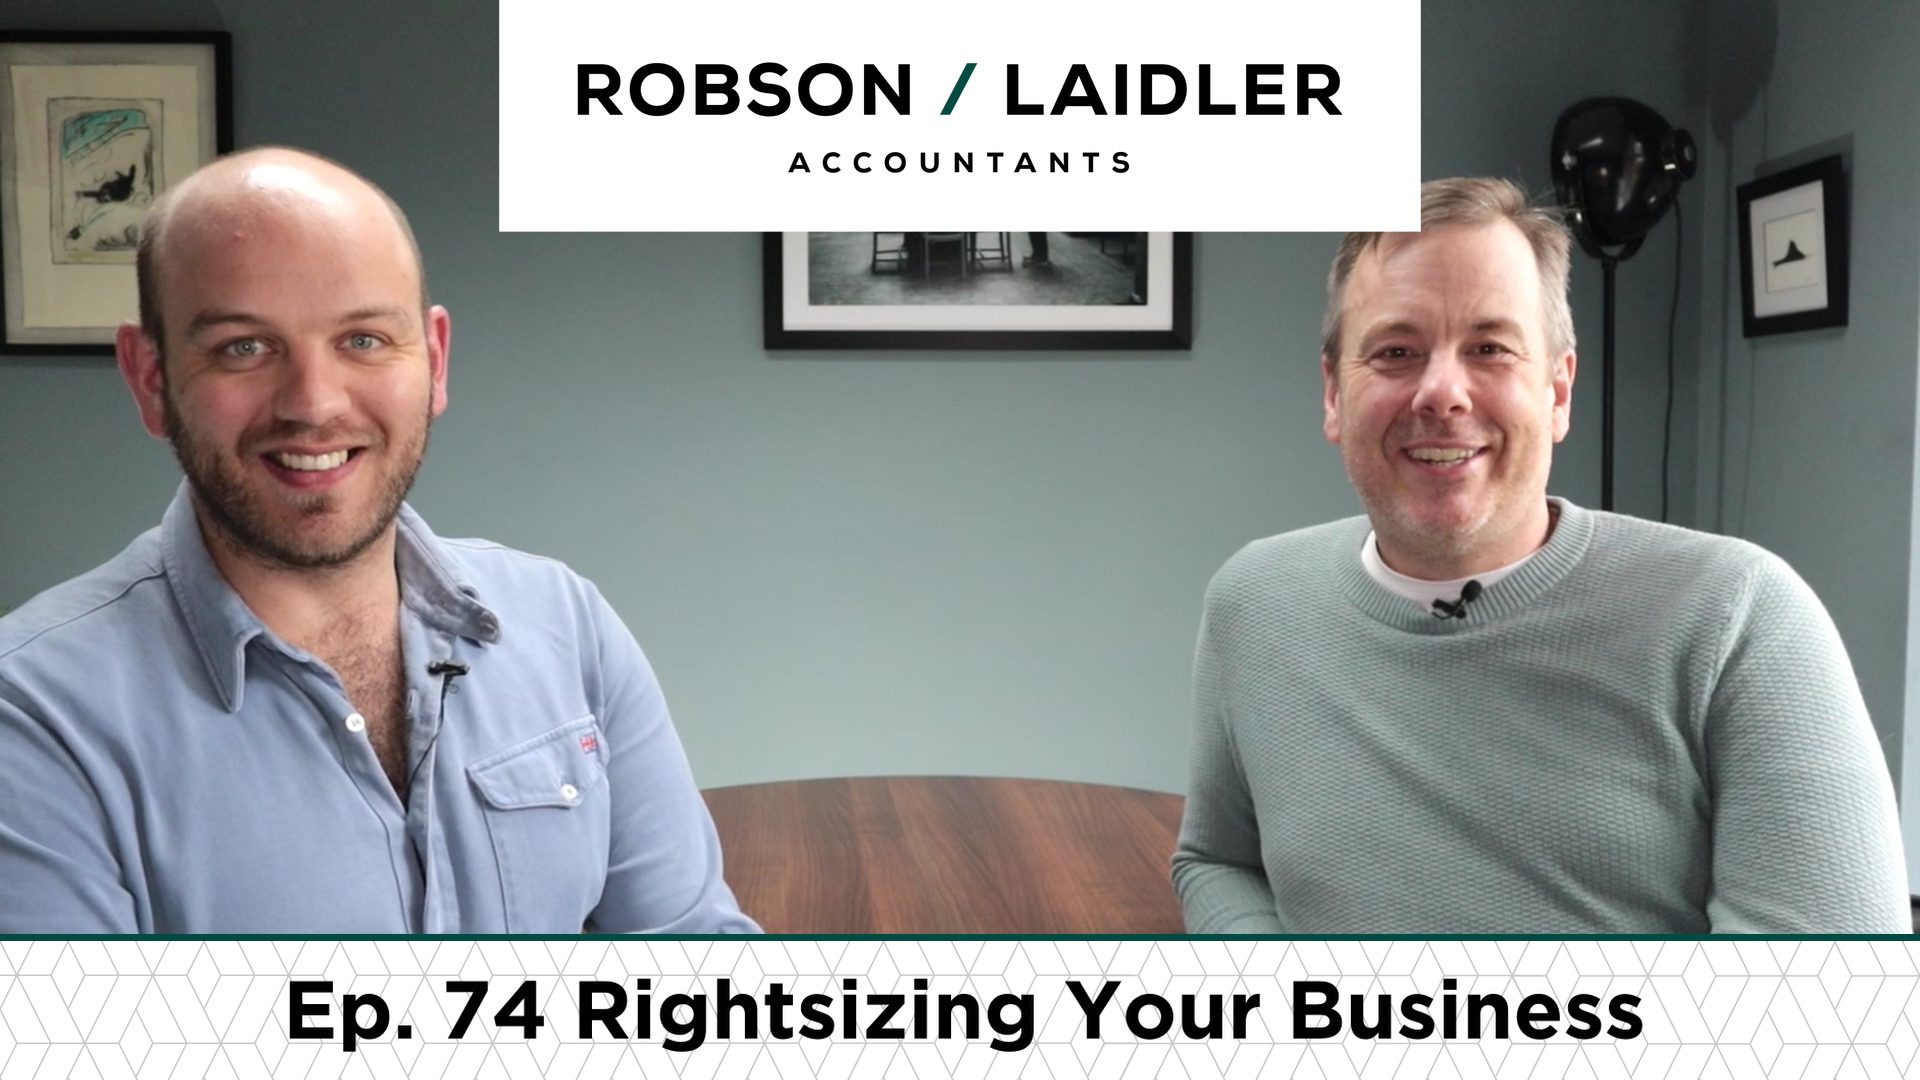 Rightsizing your business podcast